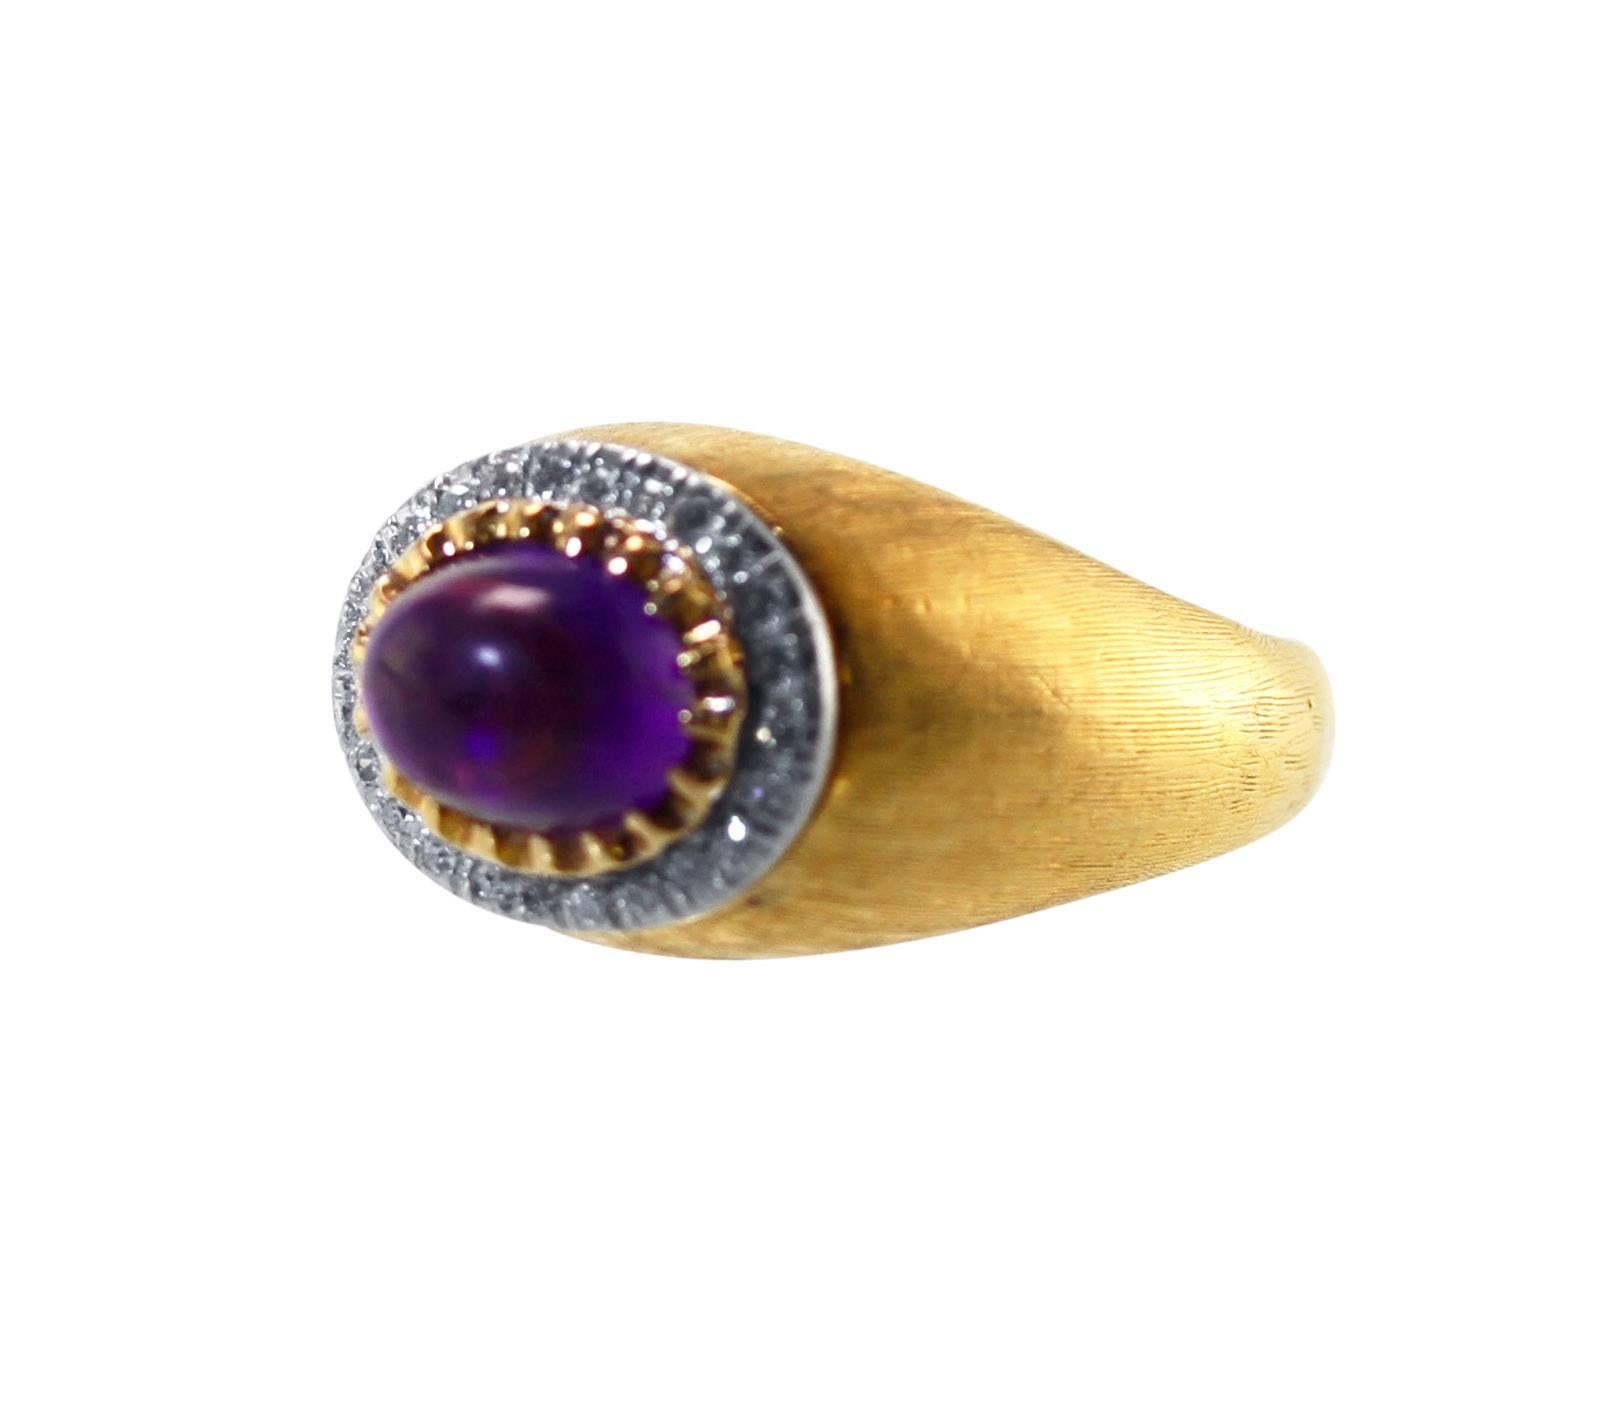 An 18 karat white and yellow gold, amethyst and diamond ring by Mario Buccellati, circa 1950, of bombe design set in the center with a cabochon amethyst weighing approximately 1.50 carats, accented by 24 single-cut diamonds weighing approximately